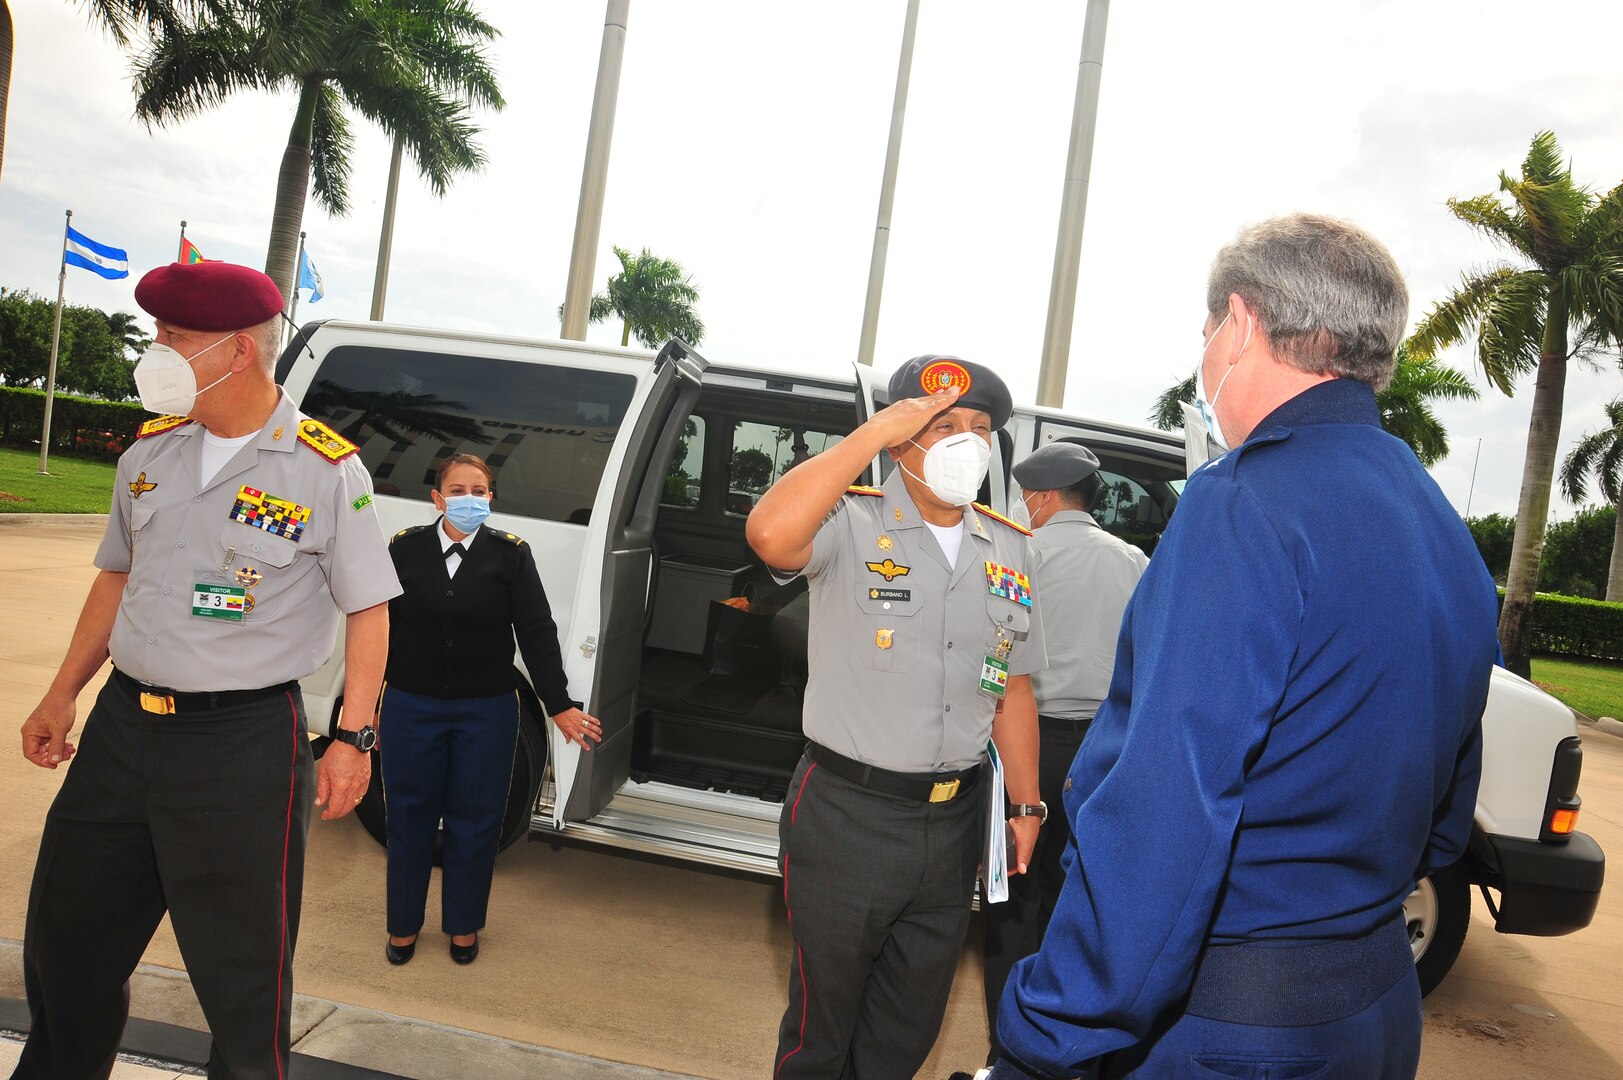 Ecuadorian Army Lt. Gen. Luis Lara Jaramillo, Chief of the Ecuadorian Armed Forces’ Joint Staff, arrives at the headquarters of U.S. Southern Command.